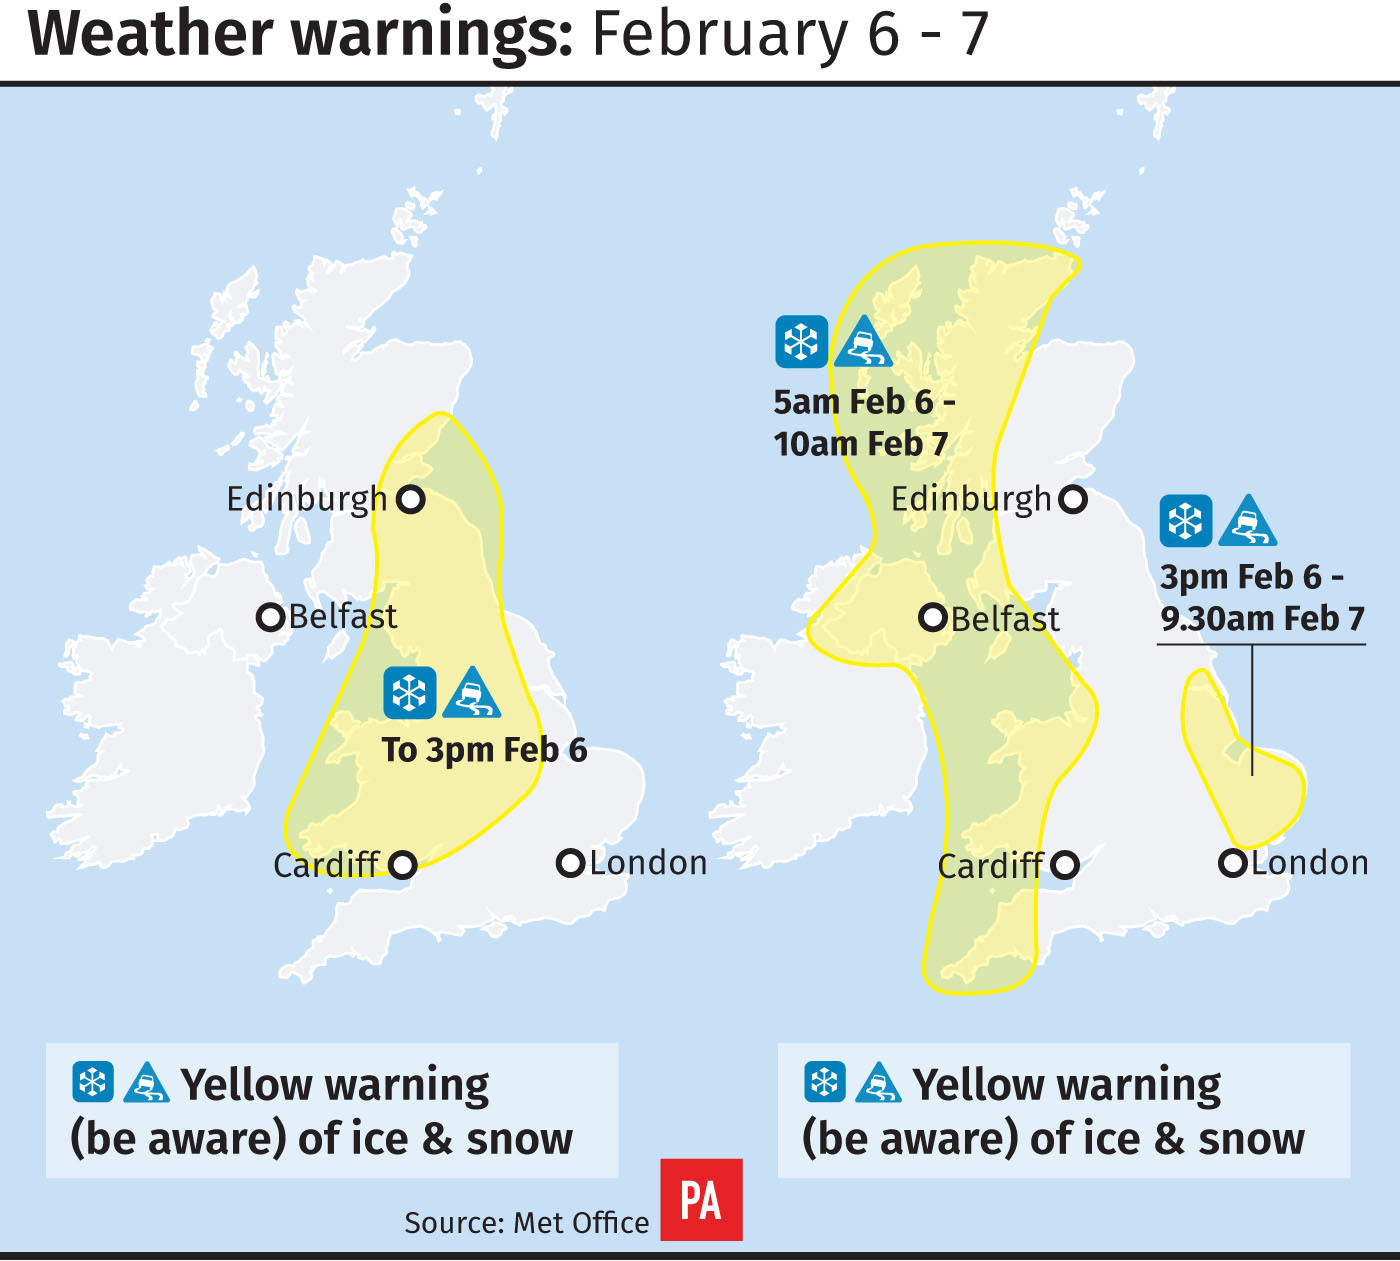 Weather warnings for snow and ice